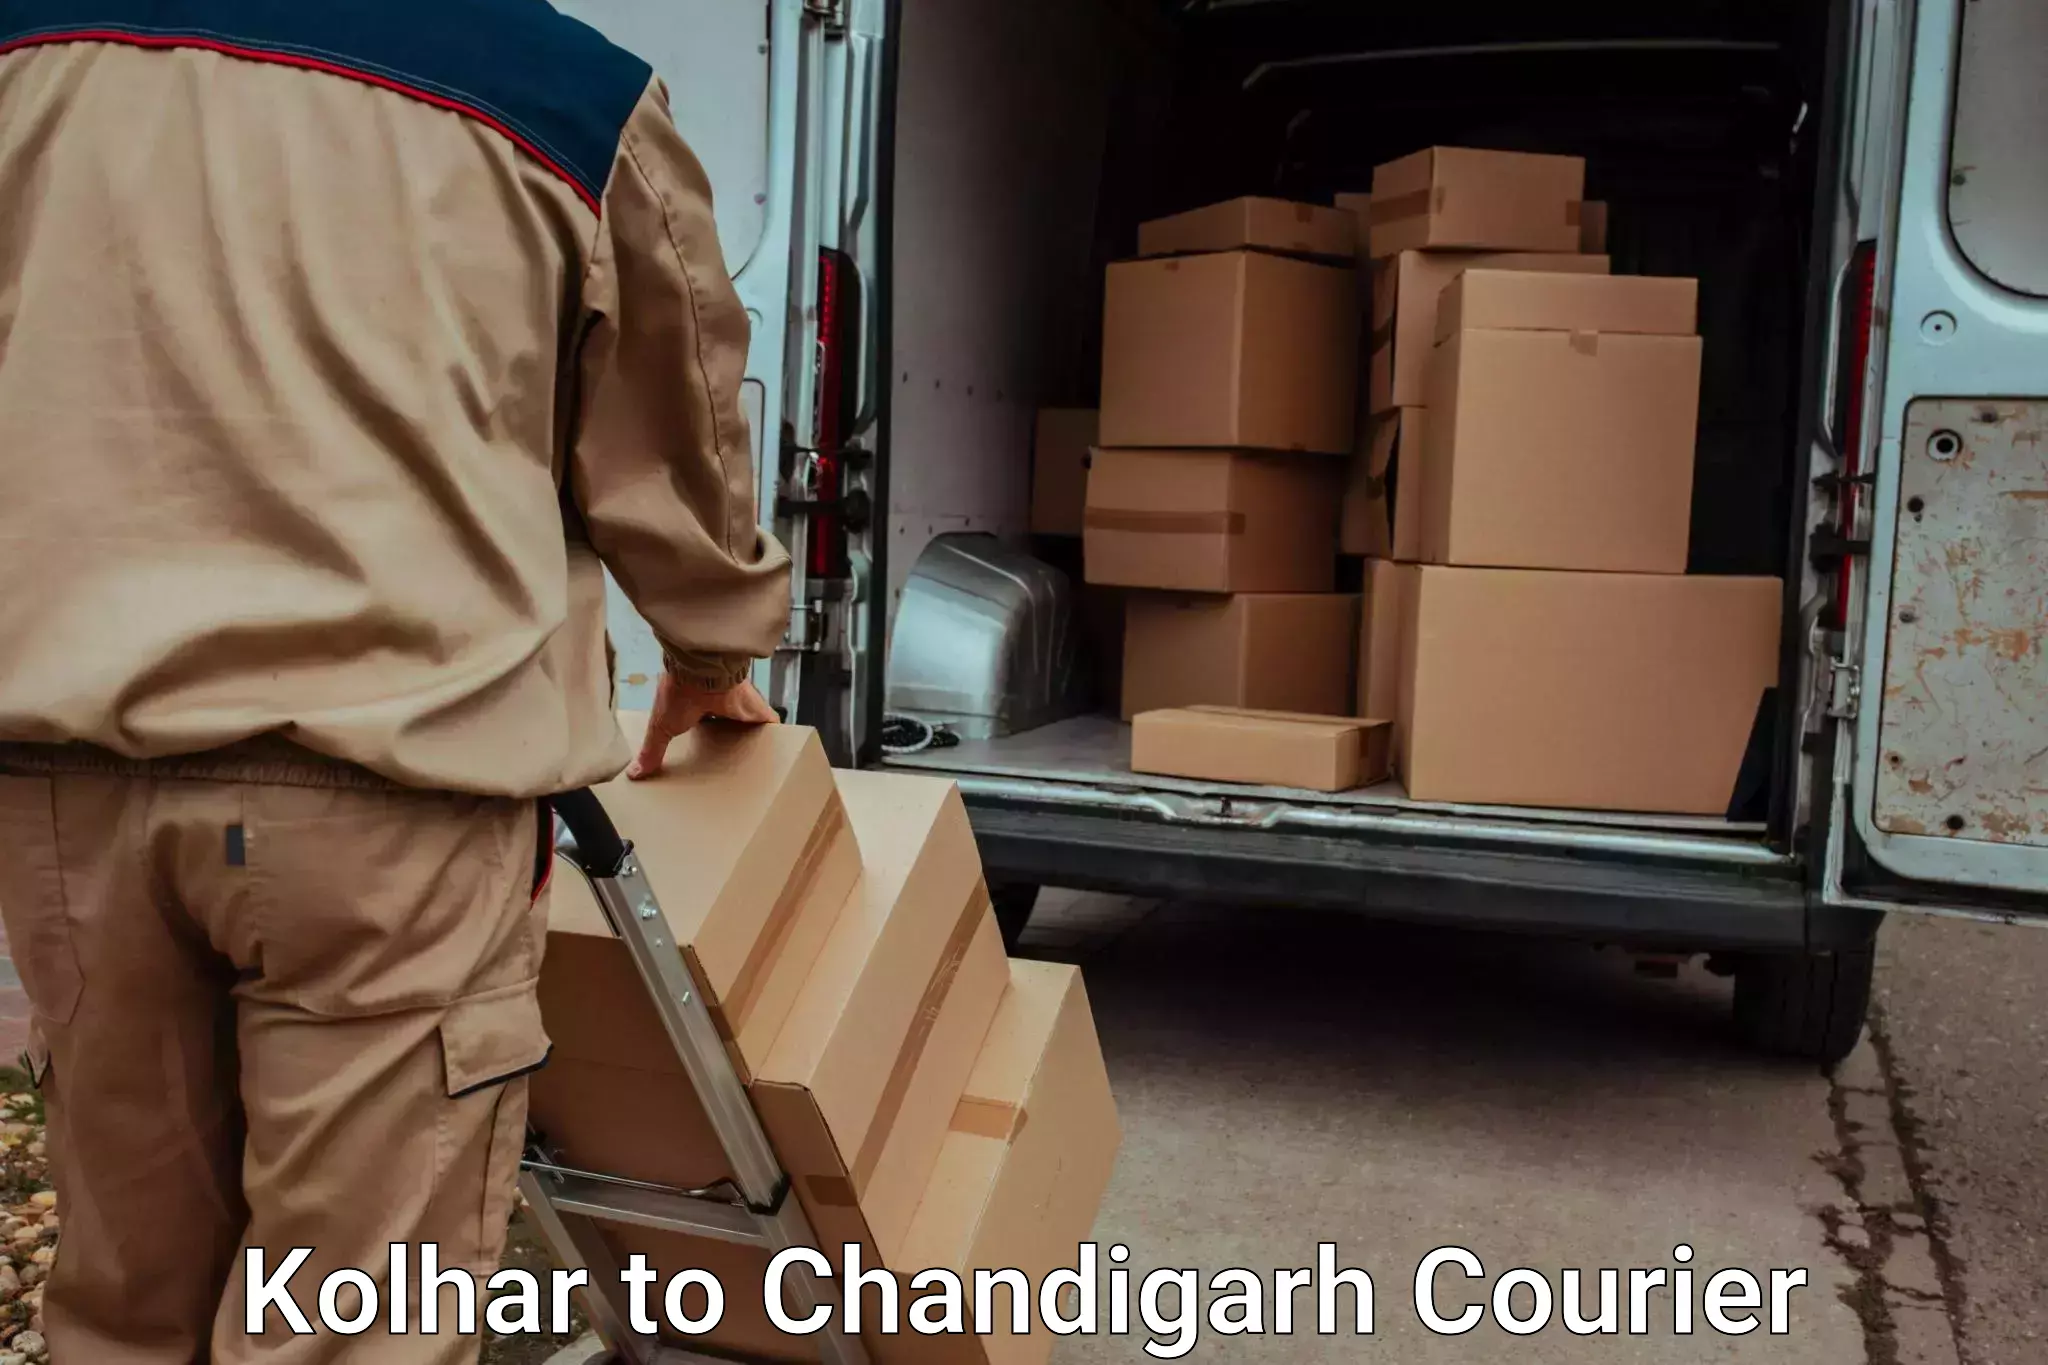 Furniture relocation experts Kolhar to Chandigarh